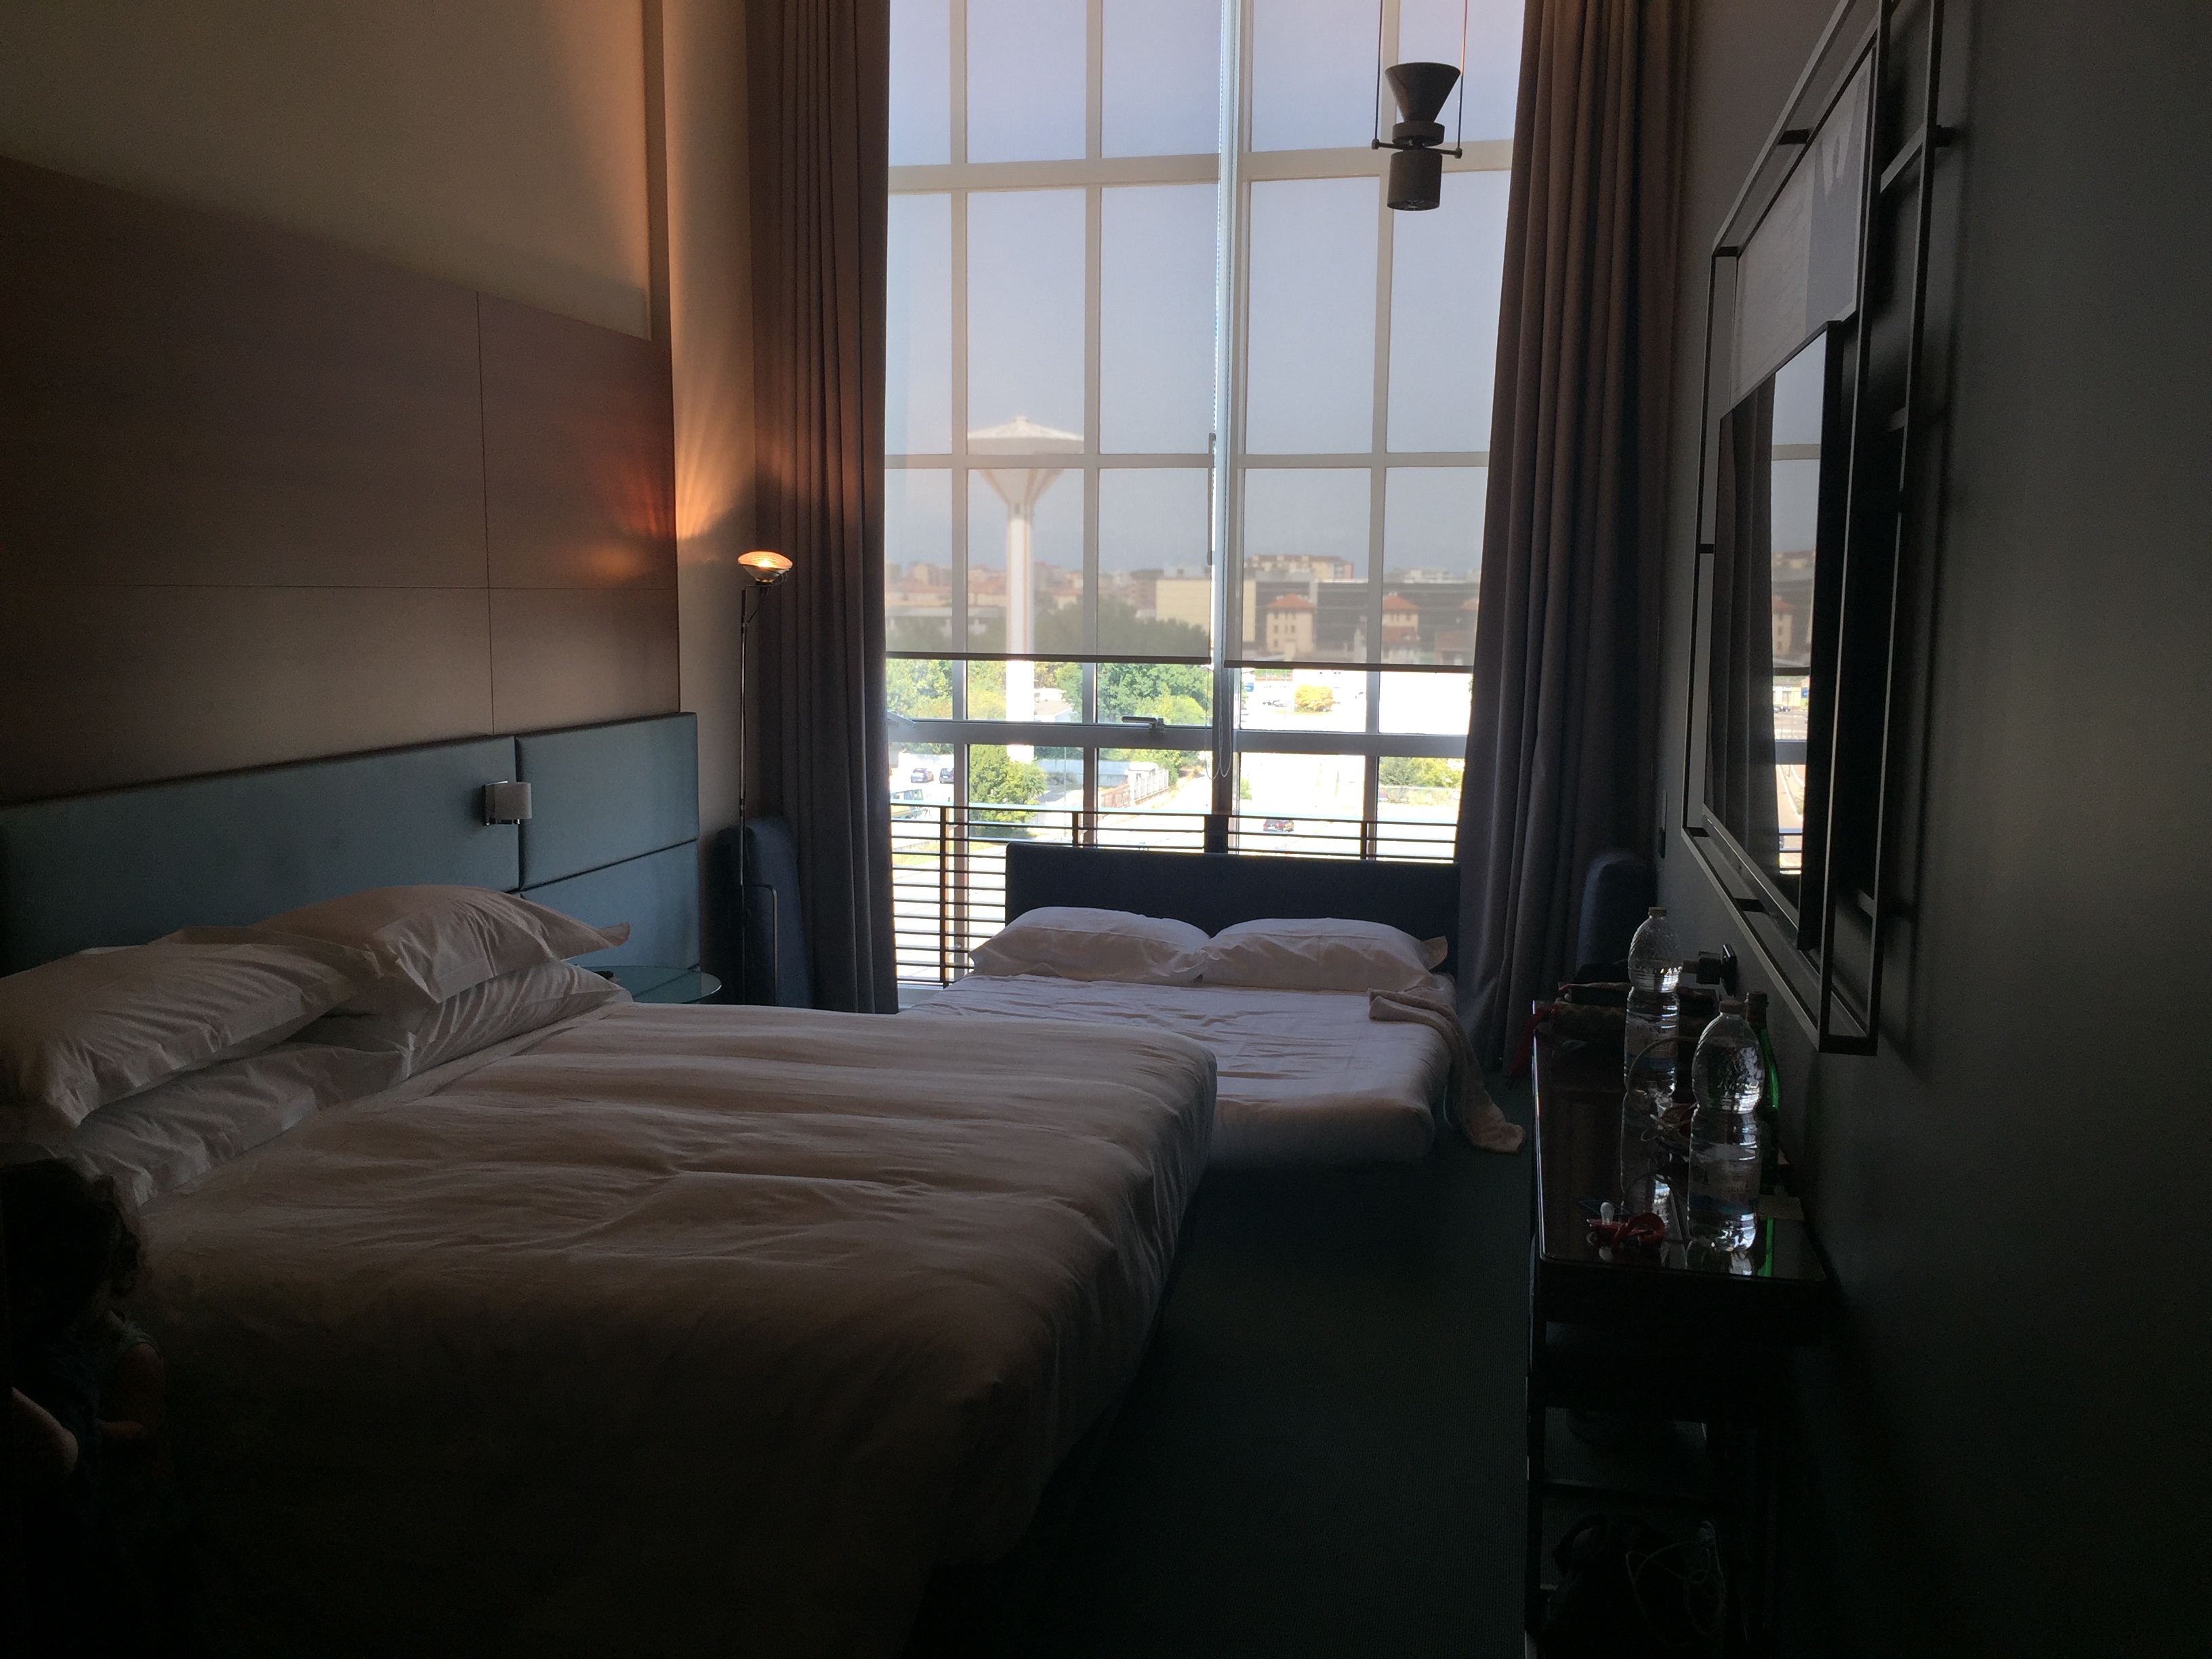 View of bedroom - DoubleTree Turin Lingotto